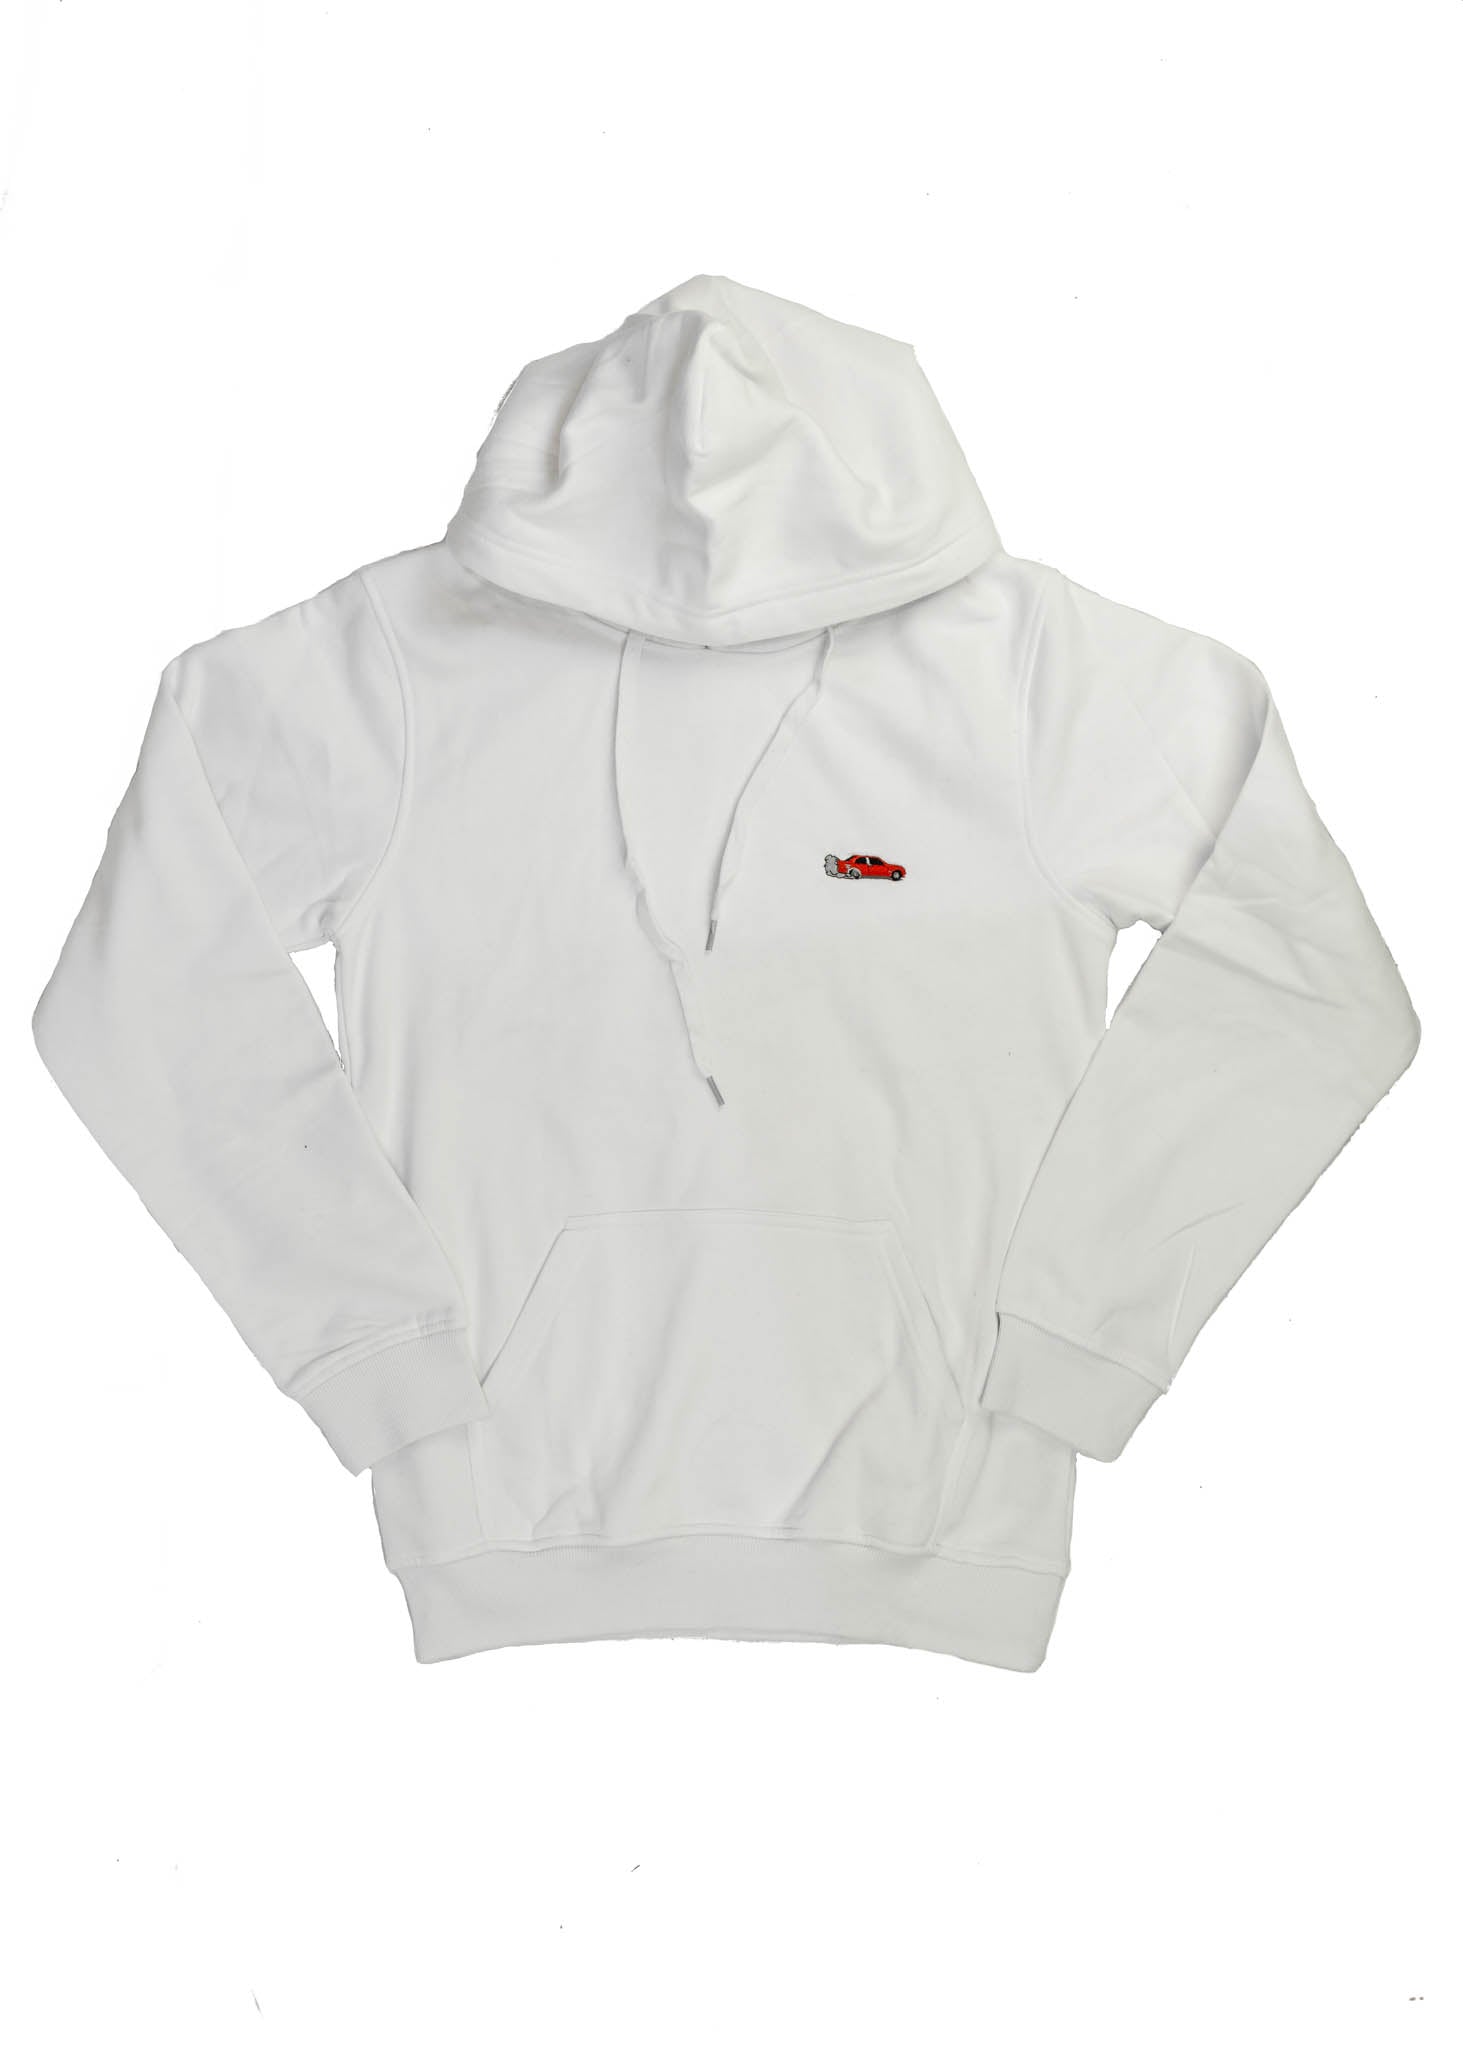 A white BMW/Bimmer unisex hoodie for men and women. Photo is the front of the sweater with an embroidered Red BMW E30 M3 doing a burnout. Fabric composition is cotton, polyester, and rayon. The material is very soft, stretchy, and non-transparent. The style of this hoodie is long sleeve, crewneck with a hood, hooded, with embroidery on the left chest.